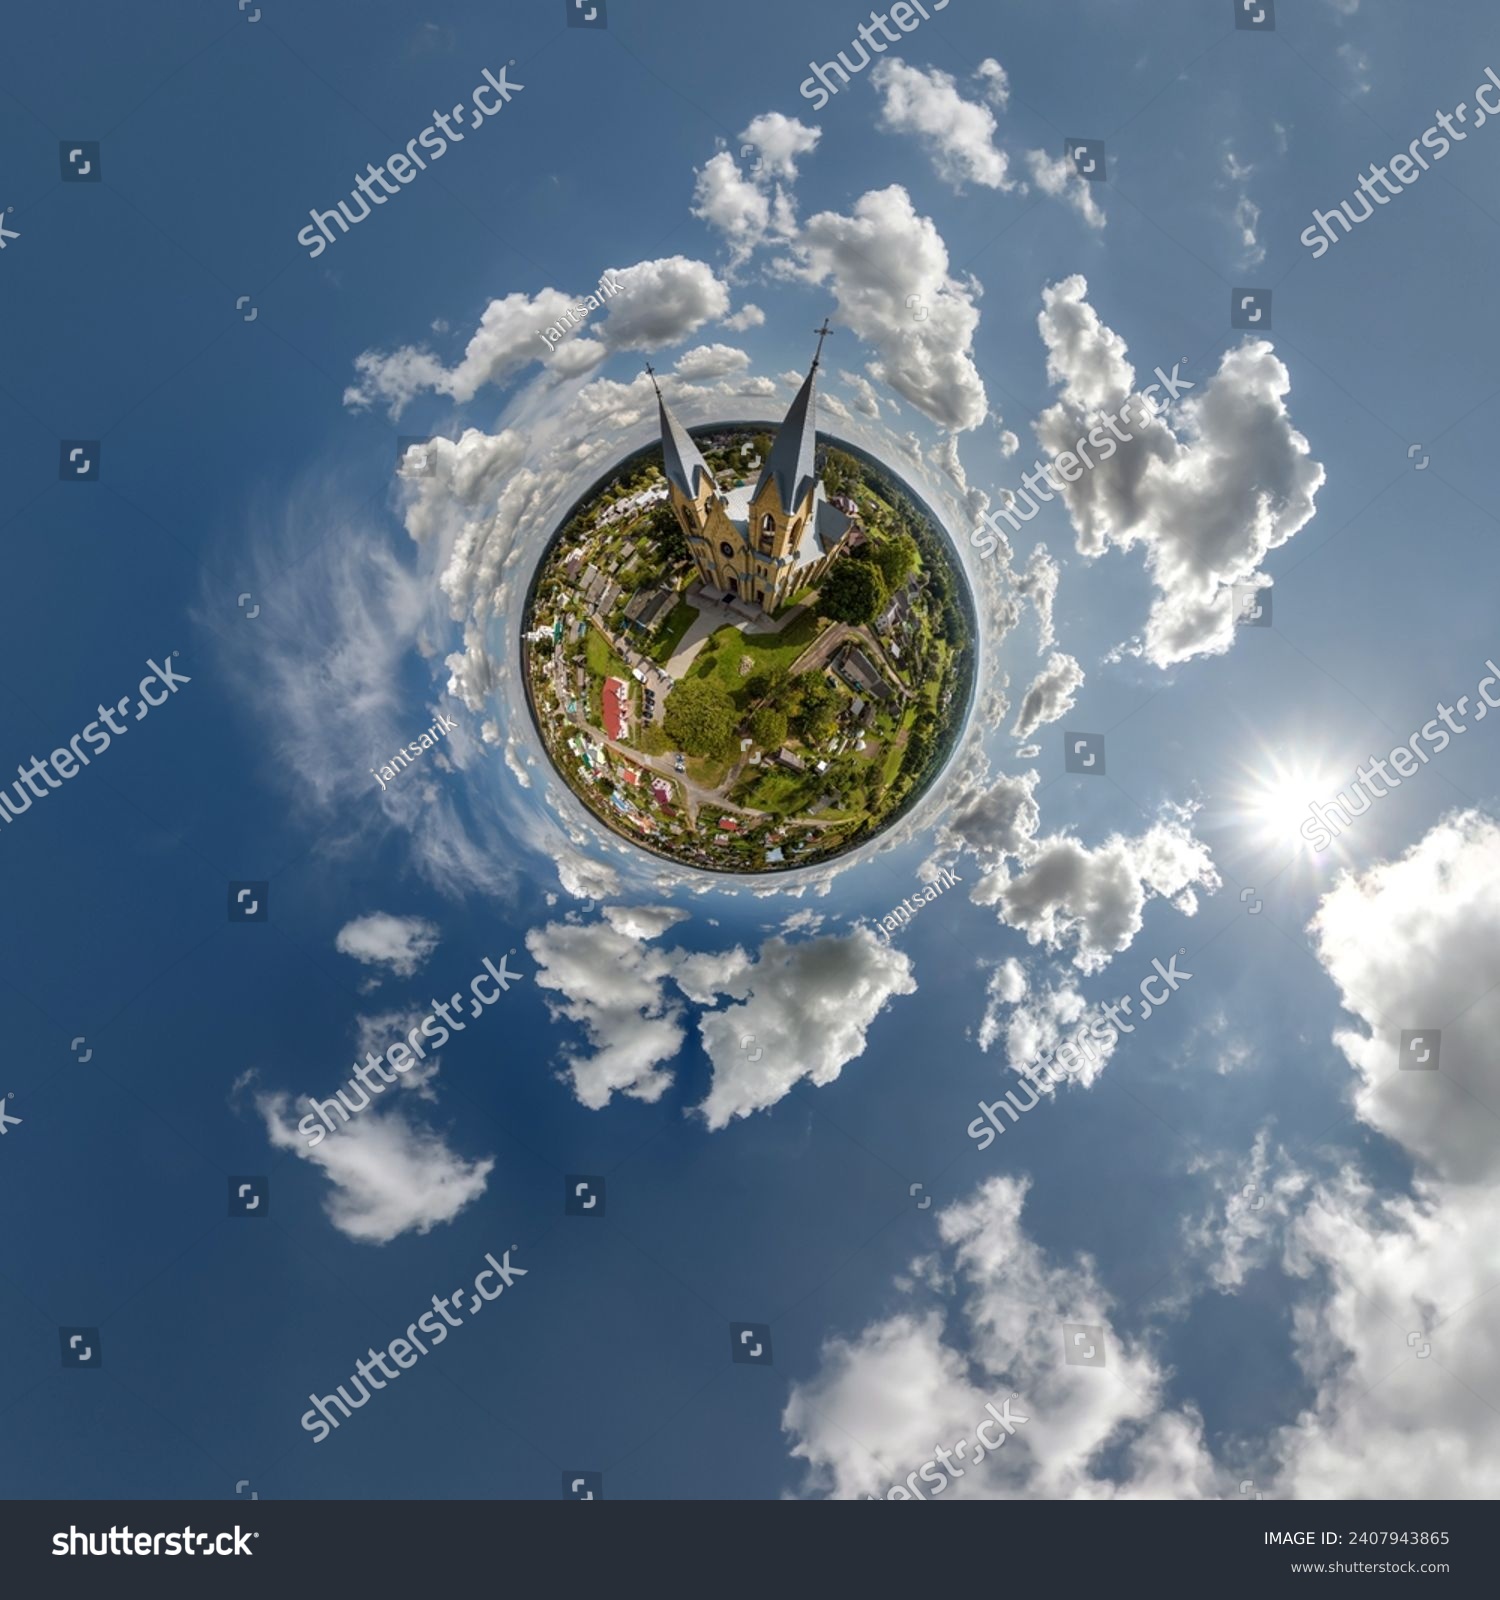 little planet transformation of spherical panorama 360 degrees overlooking church in center of globe in blue sky. Spherical abstract aerial view with curvature of space. #2407943865